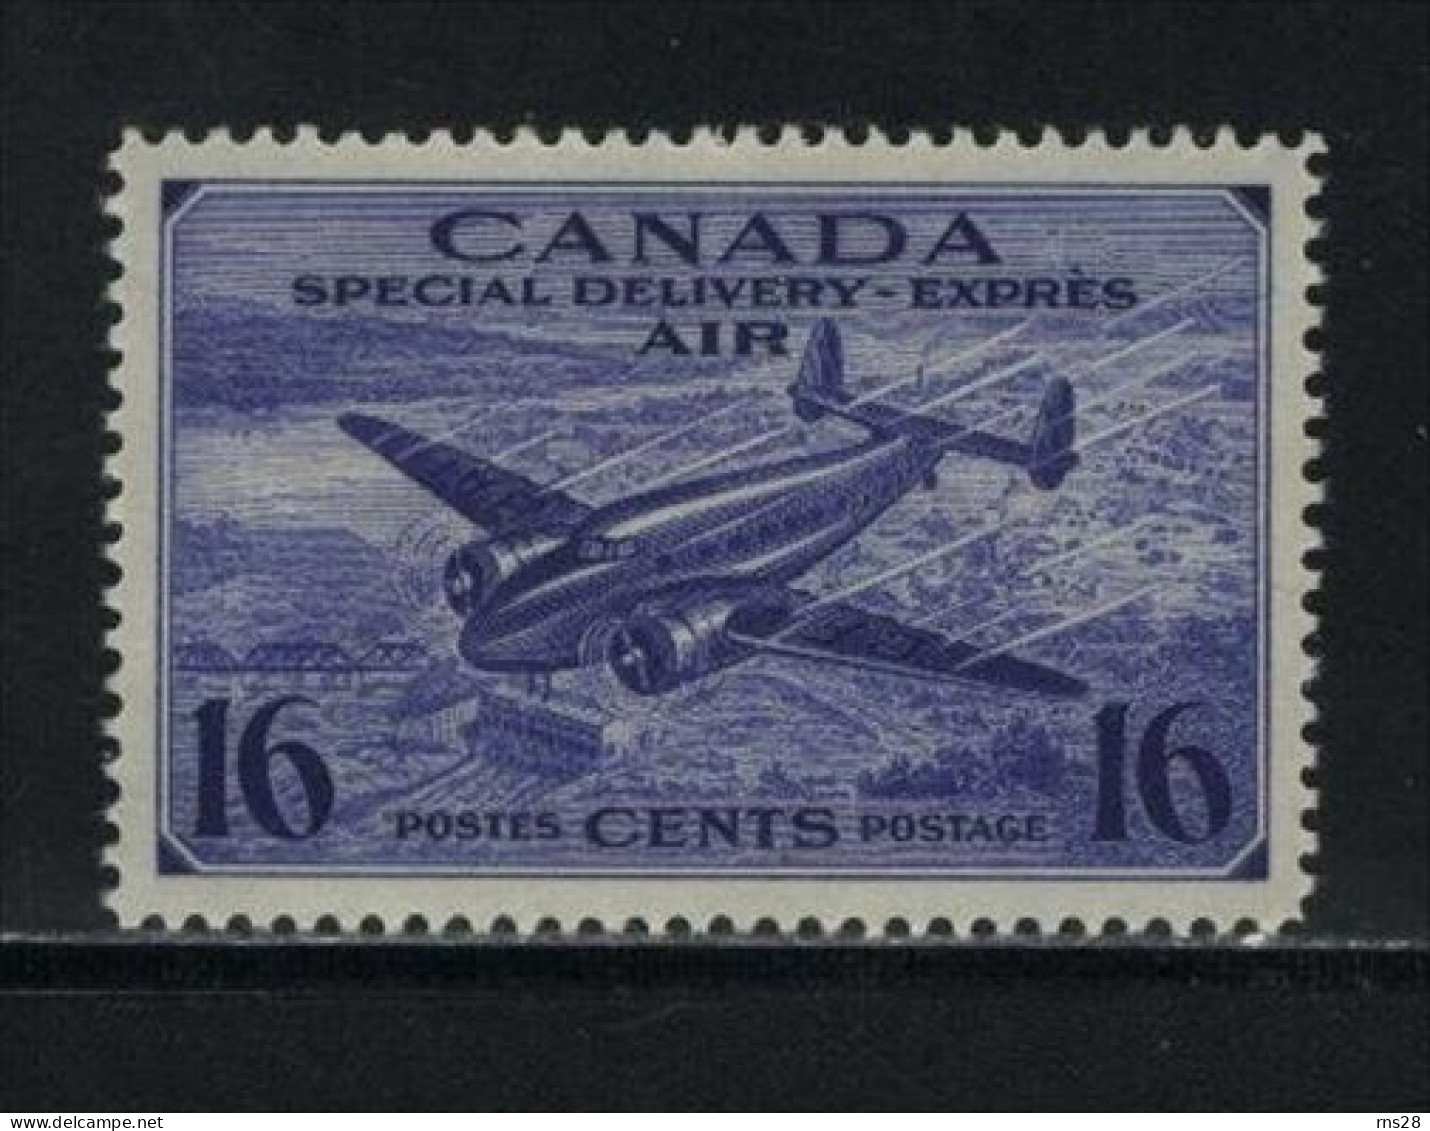 CANADA HINGED   UNITRADE CE1 ( Z5 )  Value $ 3.50 - Special Delivery